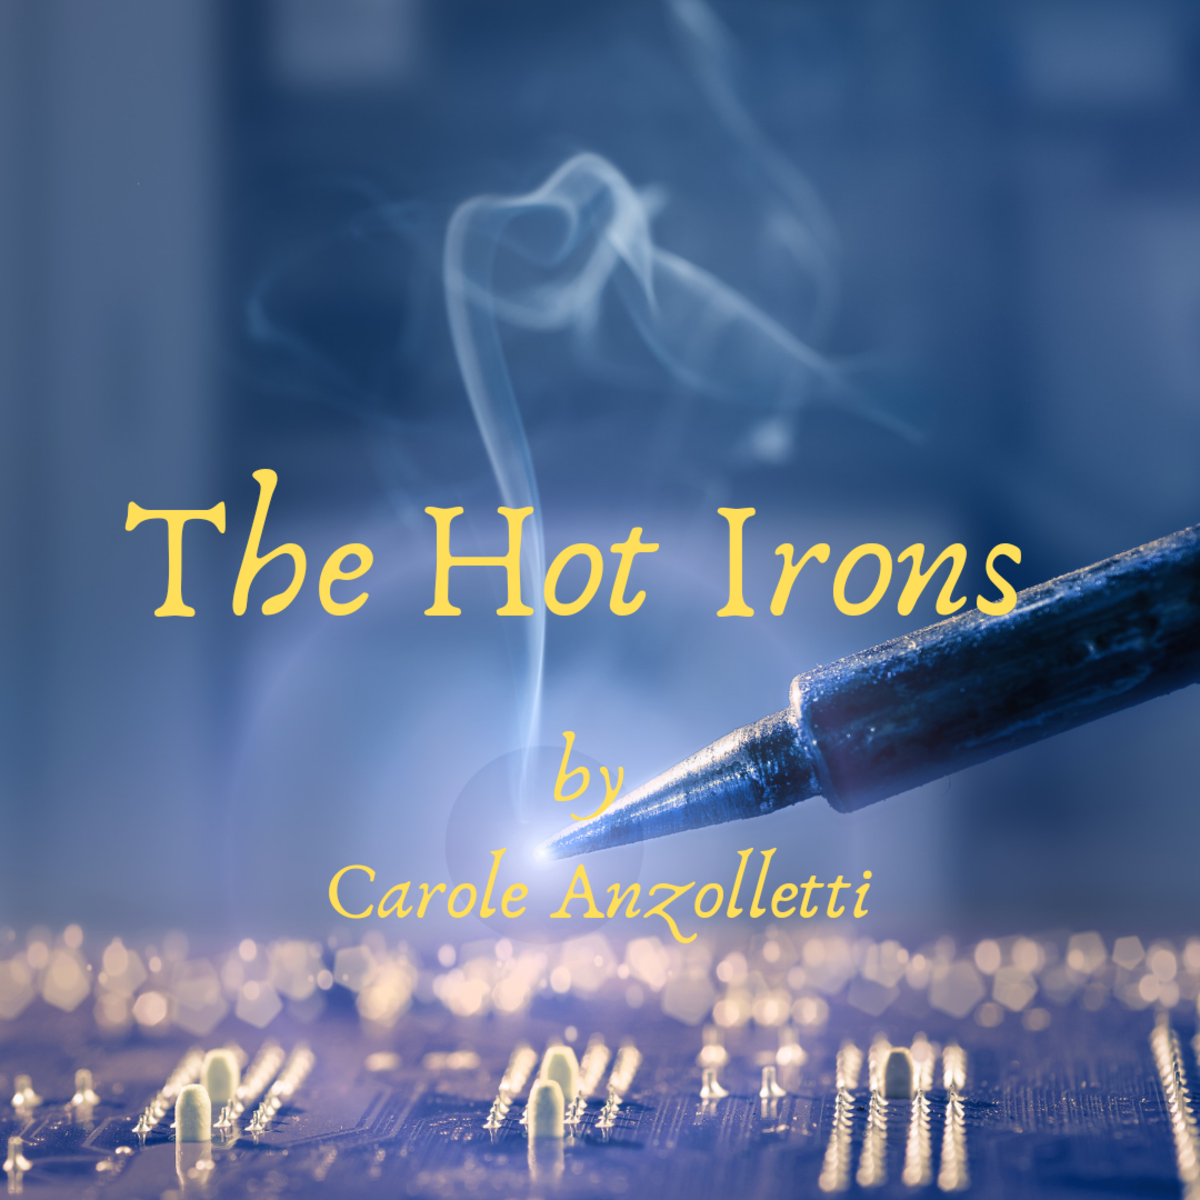 The Hot Irons